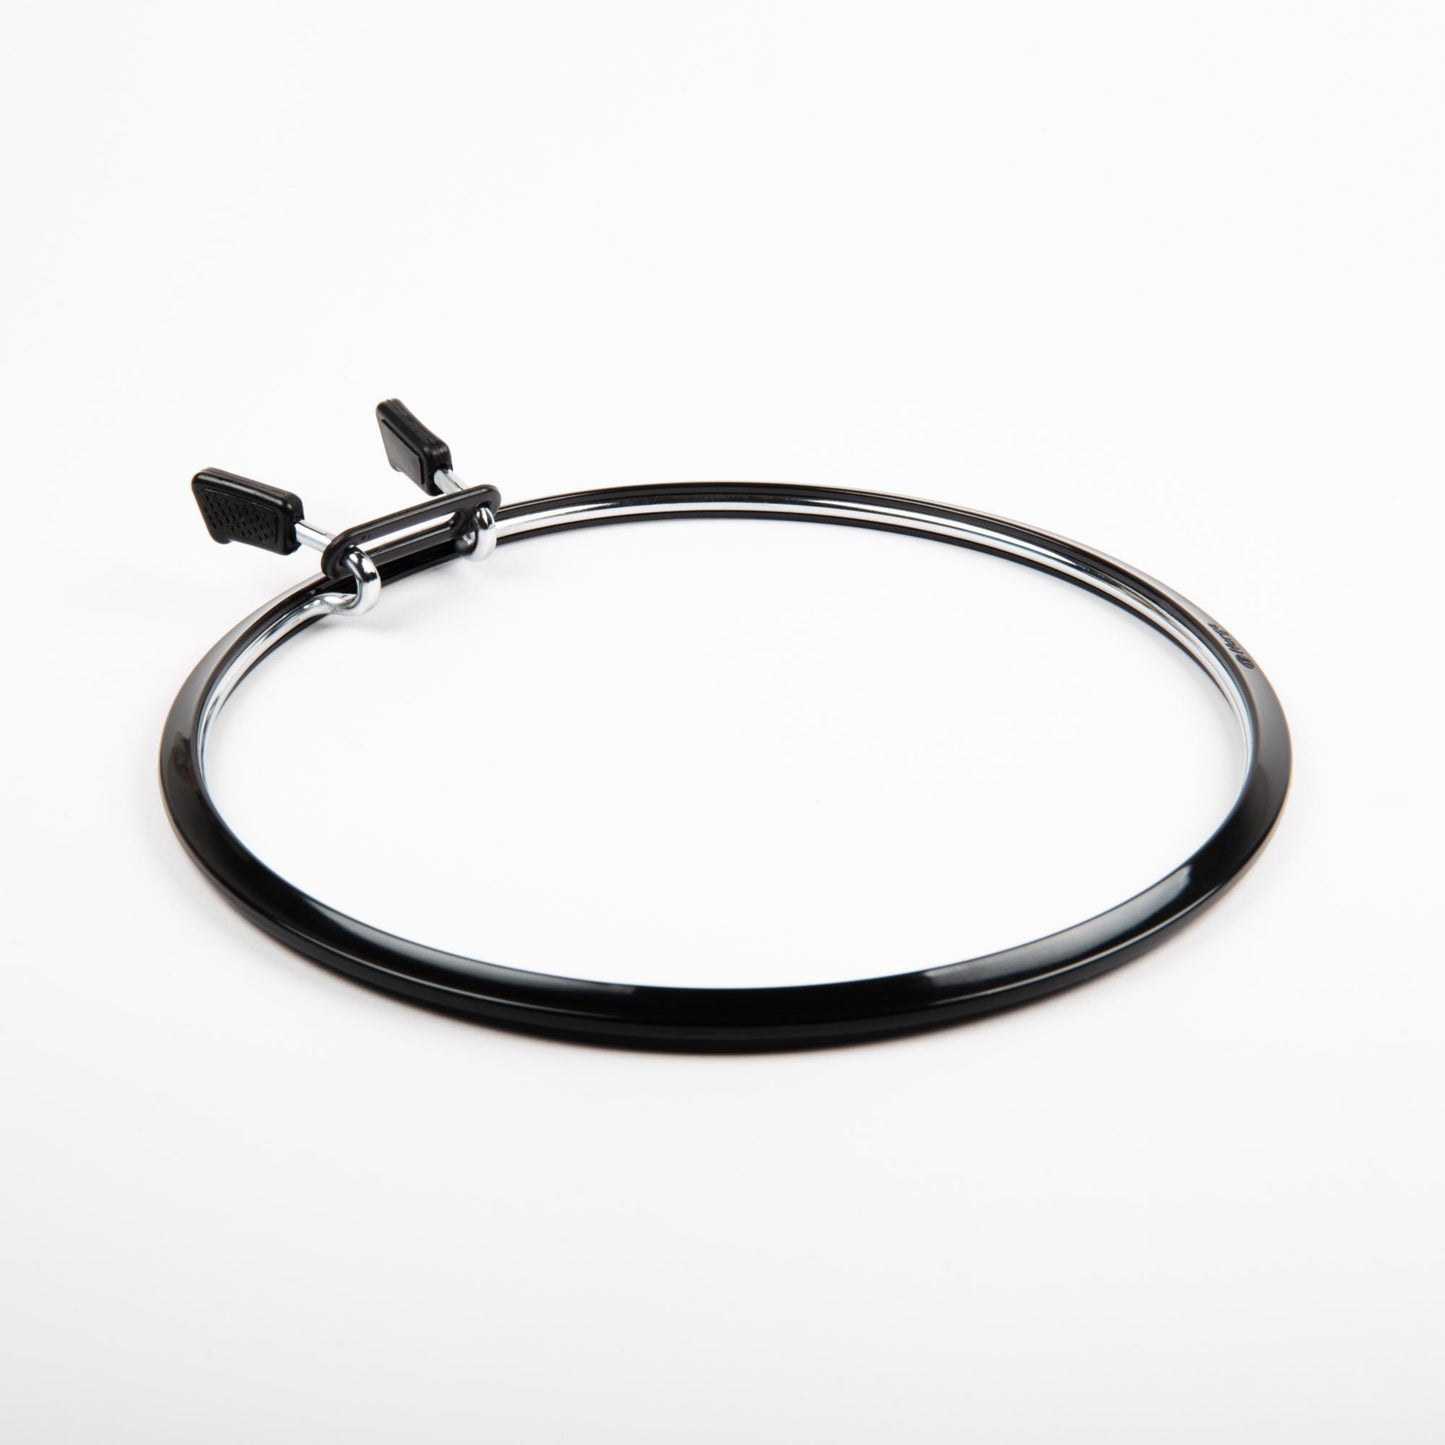 Nurge Spring Tension Hoop for Embroidery or Sewing